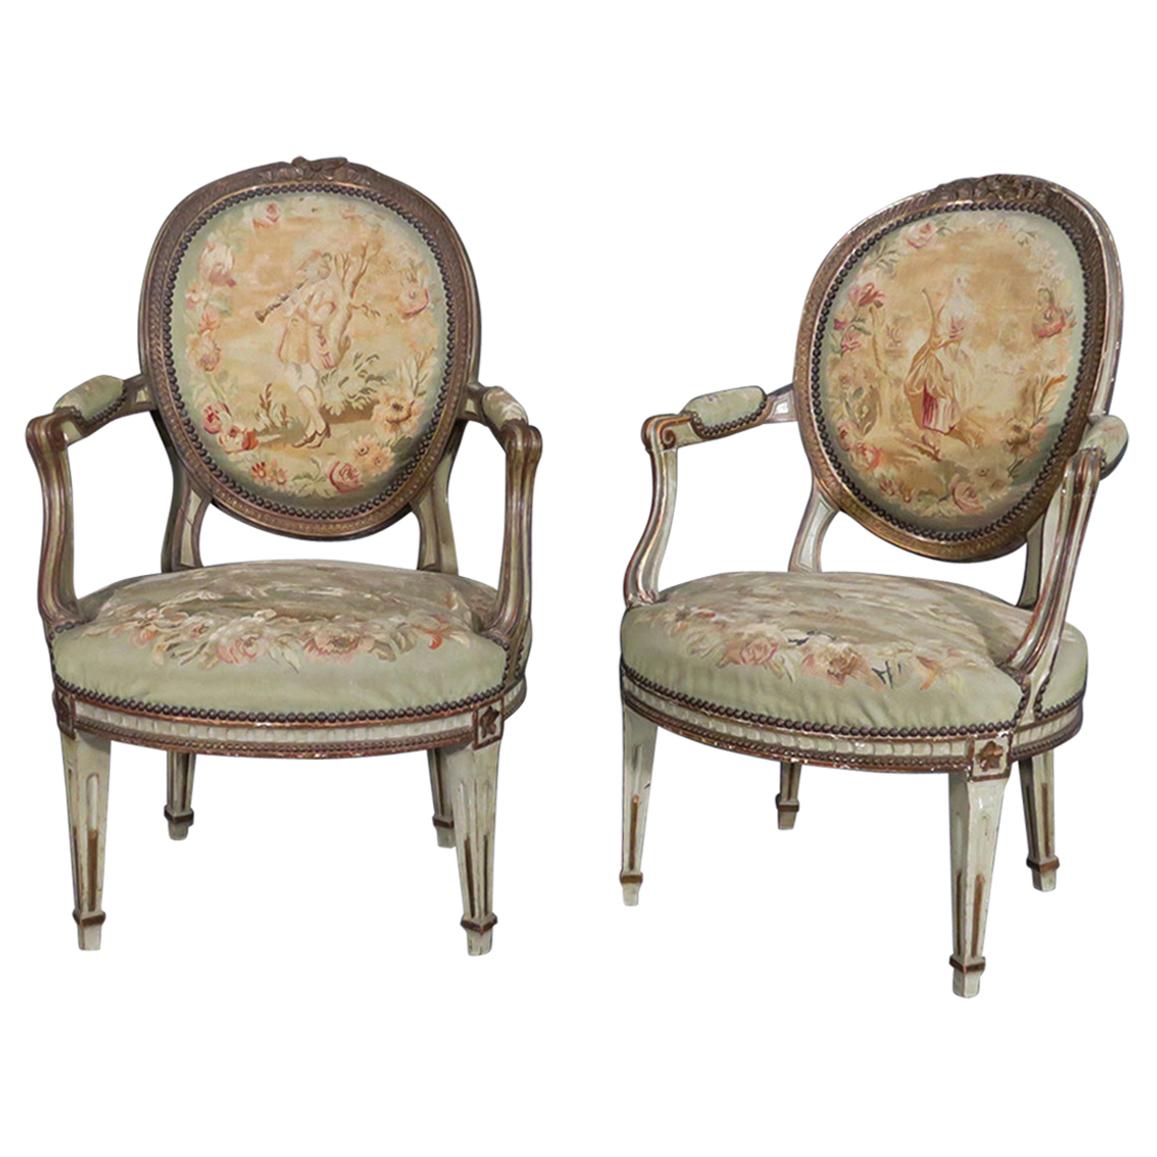 Rare Pair of Paint Decorated 1870s French Louis XVI Aubusson Fauteuils Armchairs